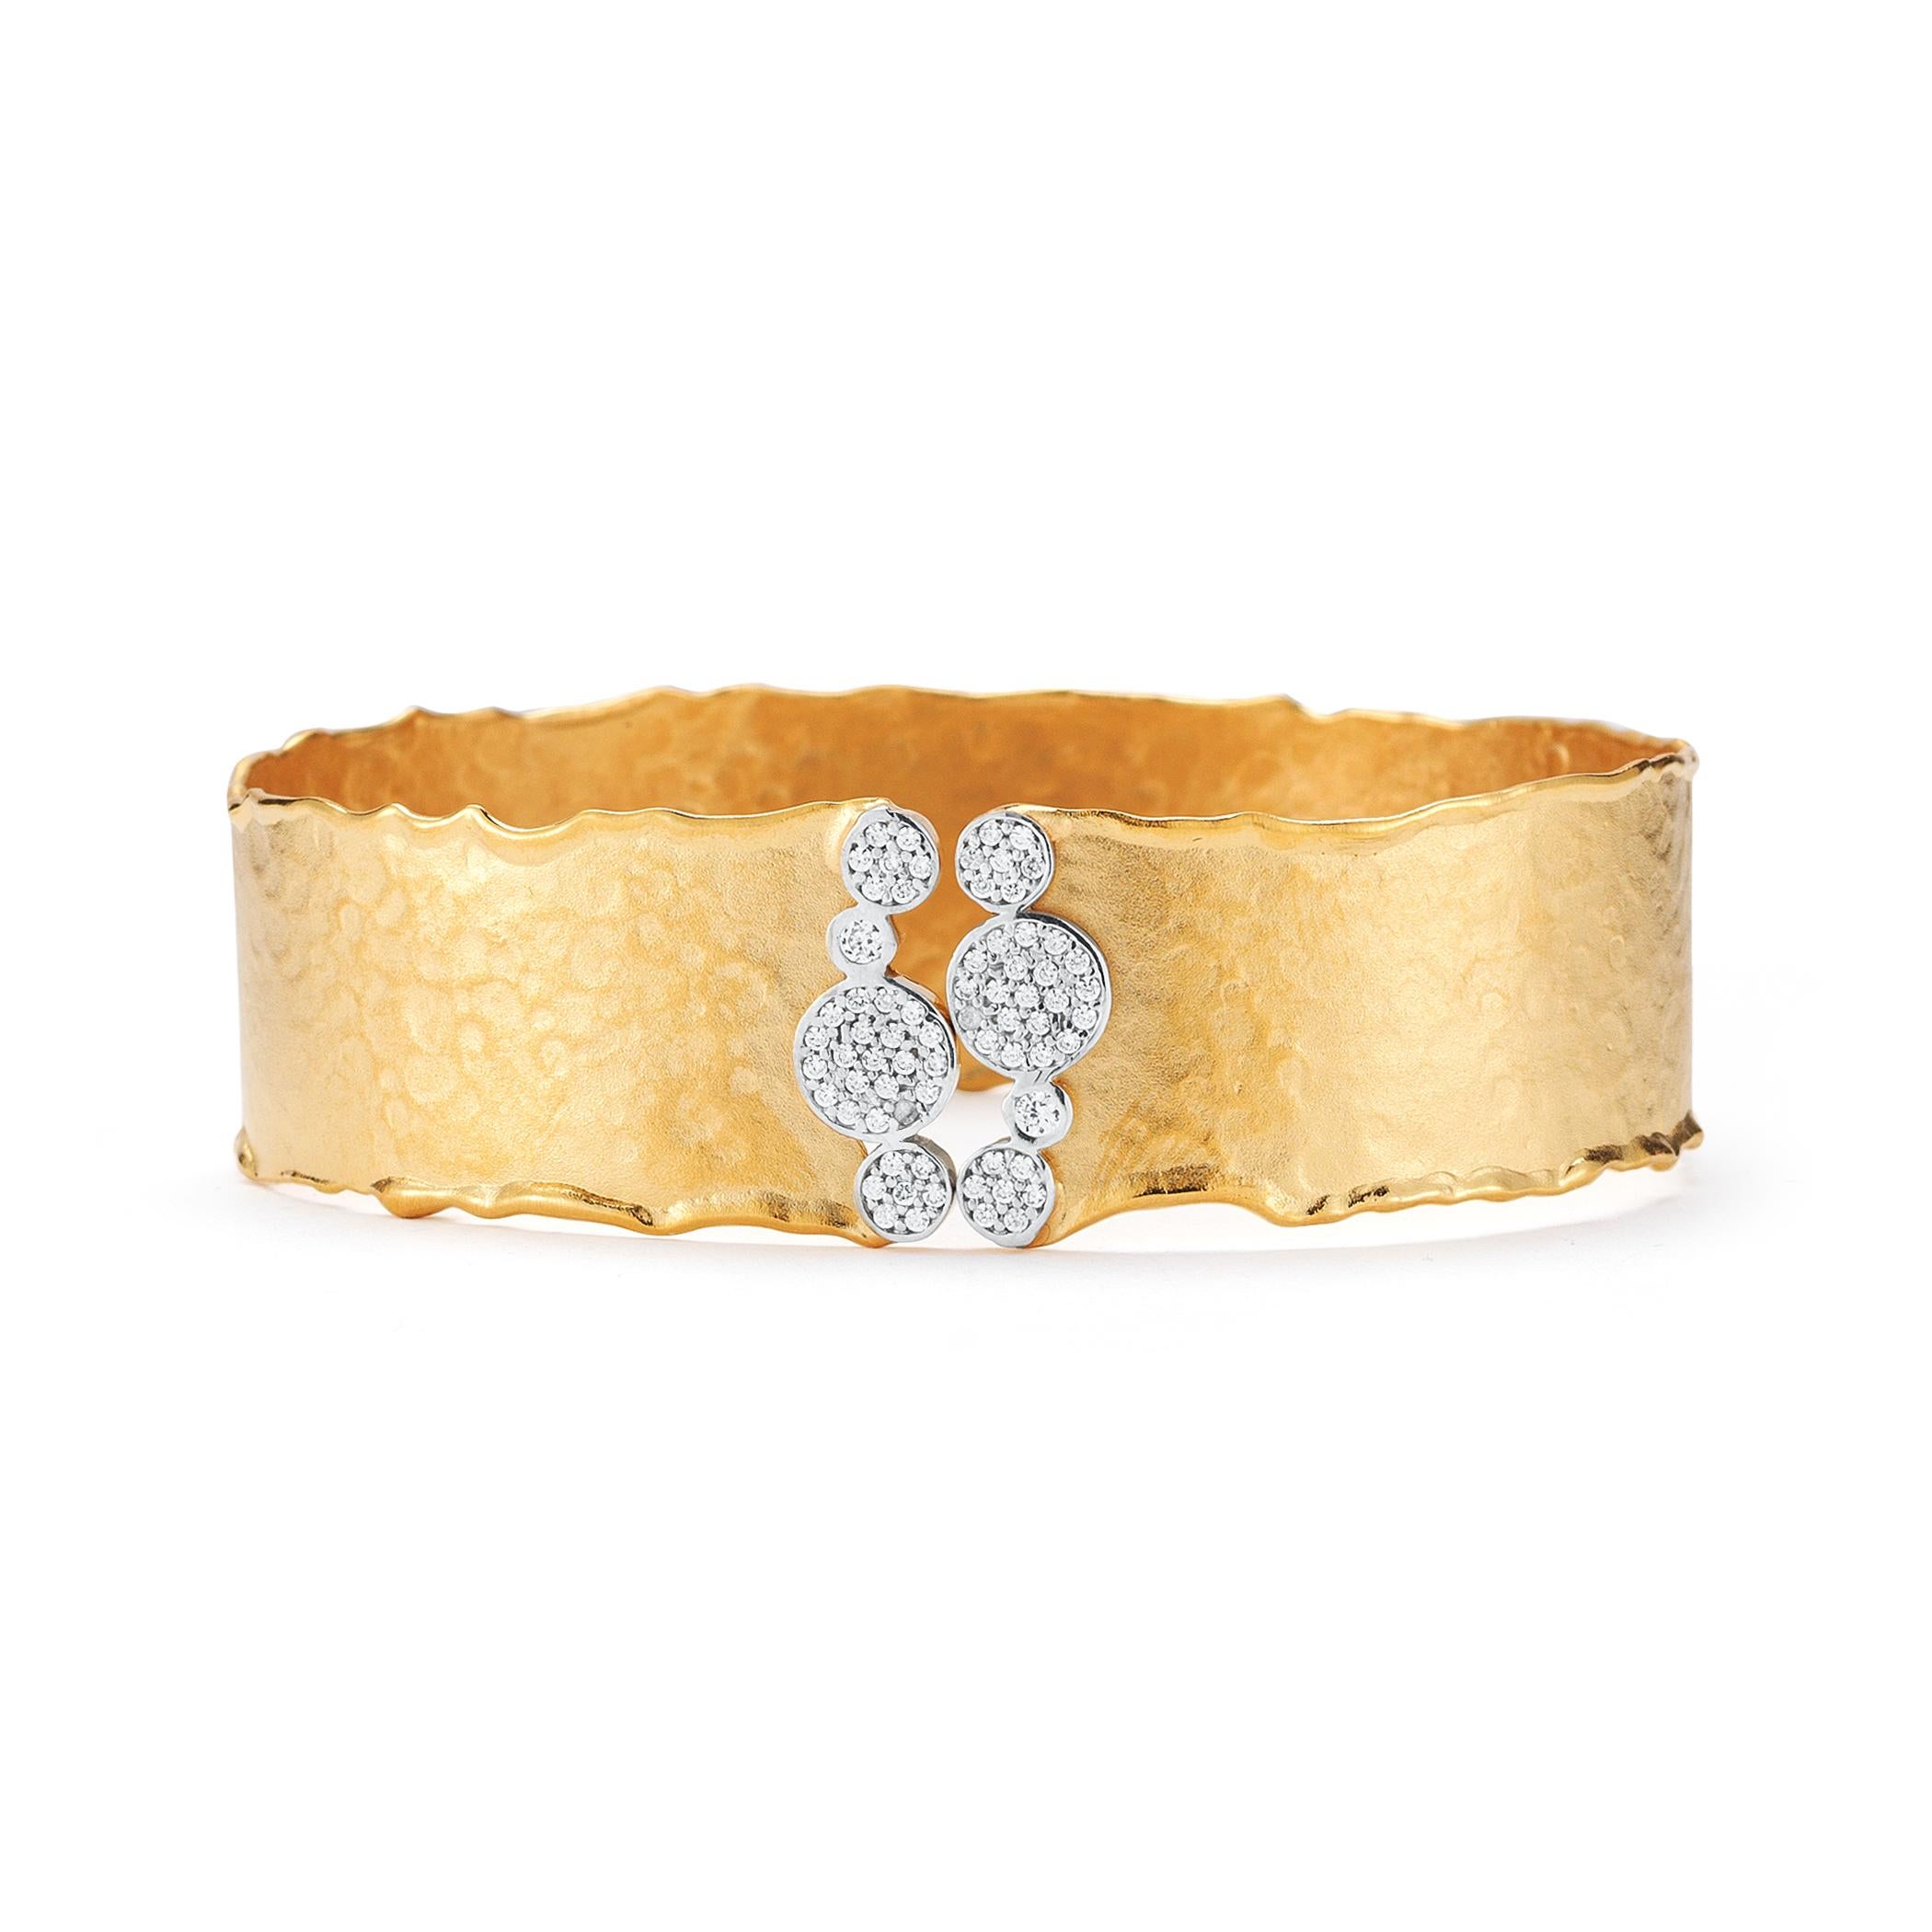 14 Karat Yellow Gold Hand-Crafted Matte and Hammer-Finish Scallop-Edged 17mm Narrow Cuff Bracelet, Enhanced with 0.49 Carat Of Pave Set Diamond Bubbles.
